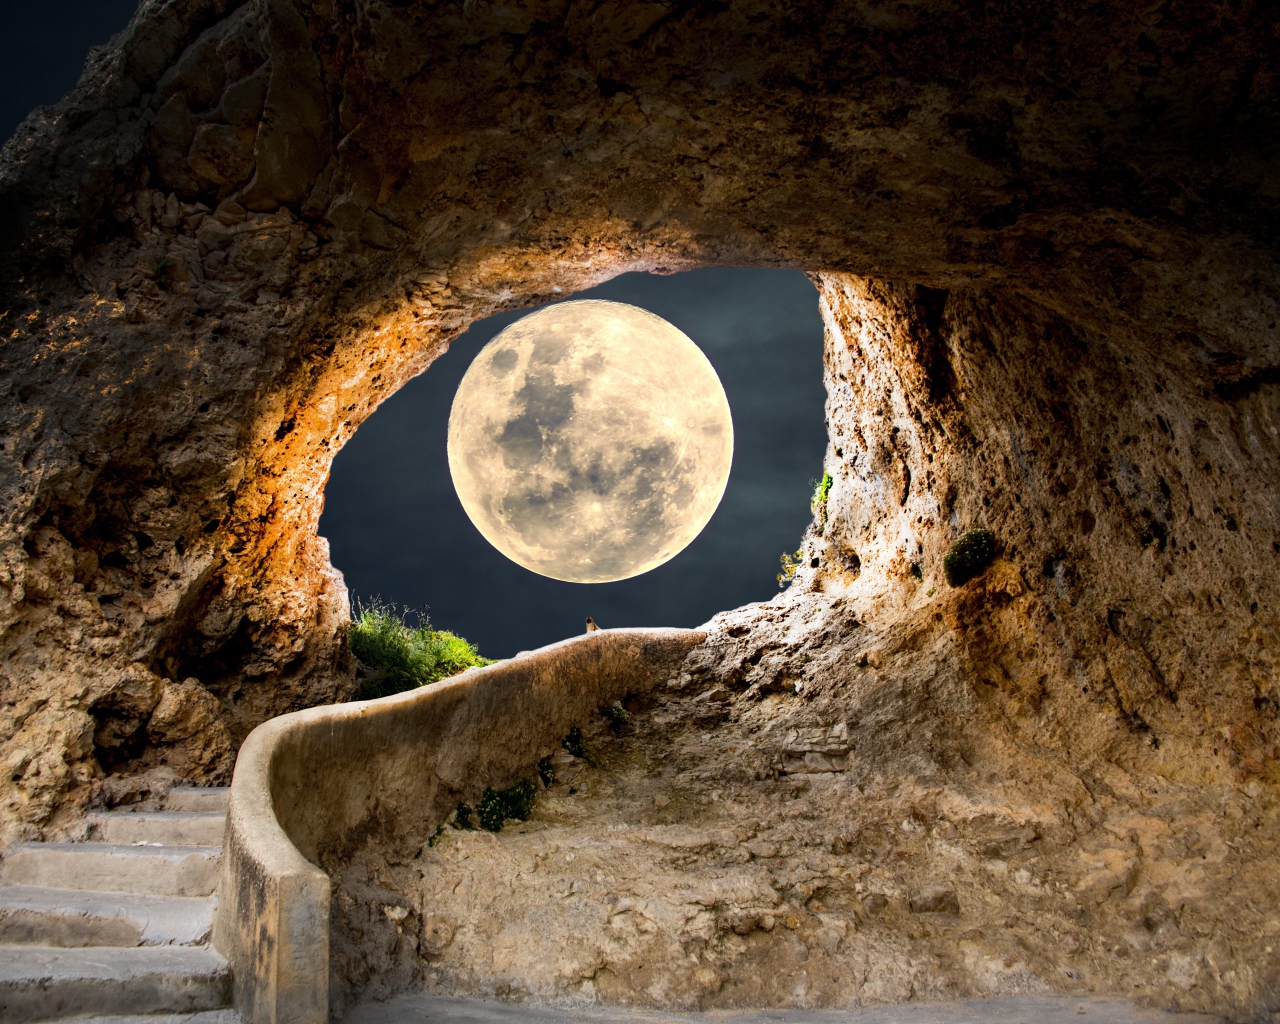 A large white moon illuminates the passage to the cave